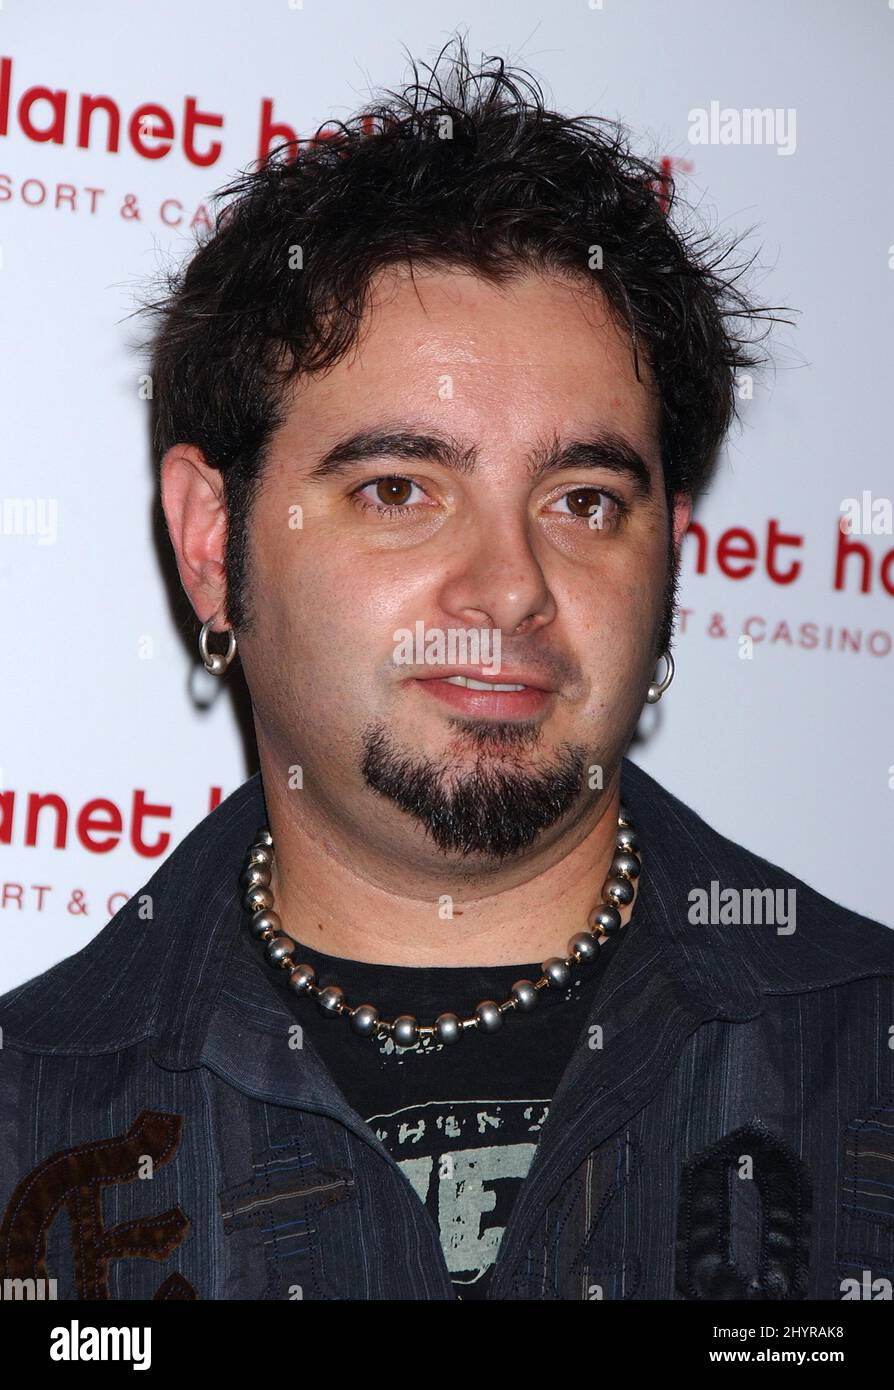 Chris Kirkpatrick attends the Planet Hollywood Resort and Casino Grand Opening in Las Vegas. Stock Photo